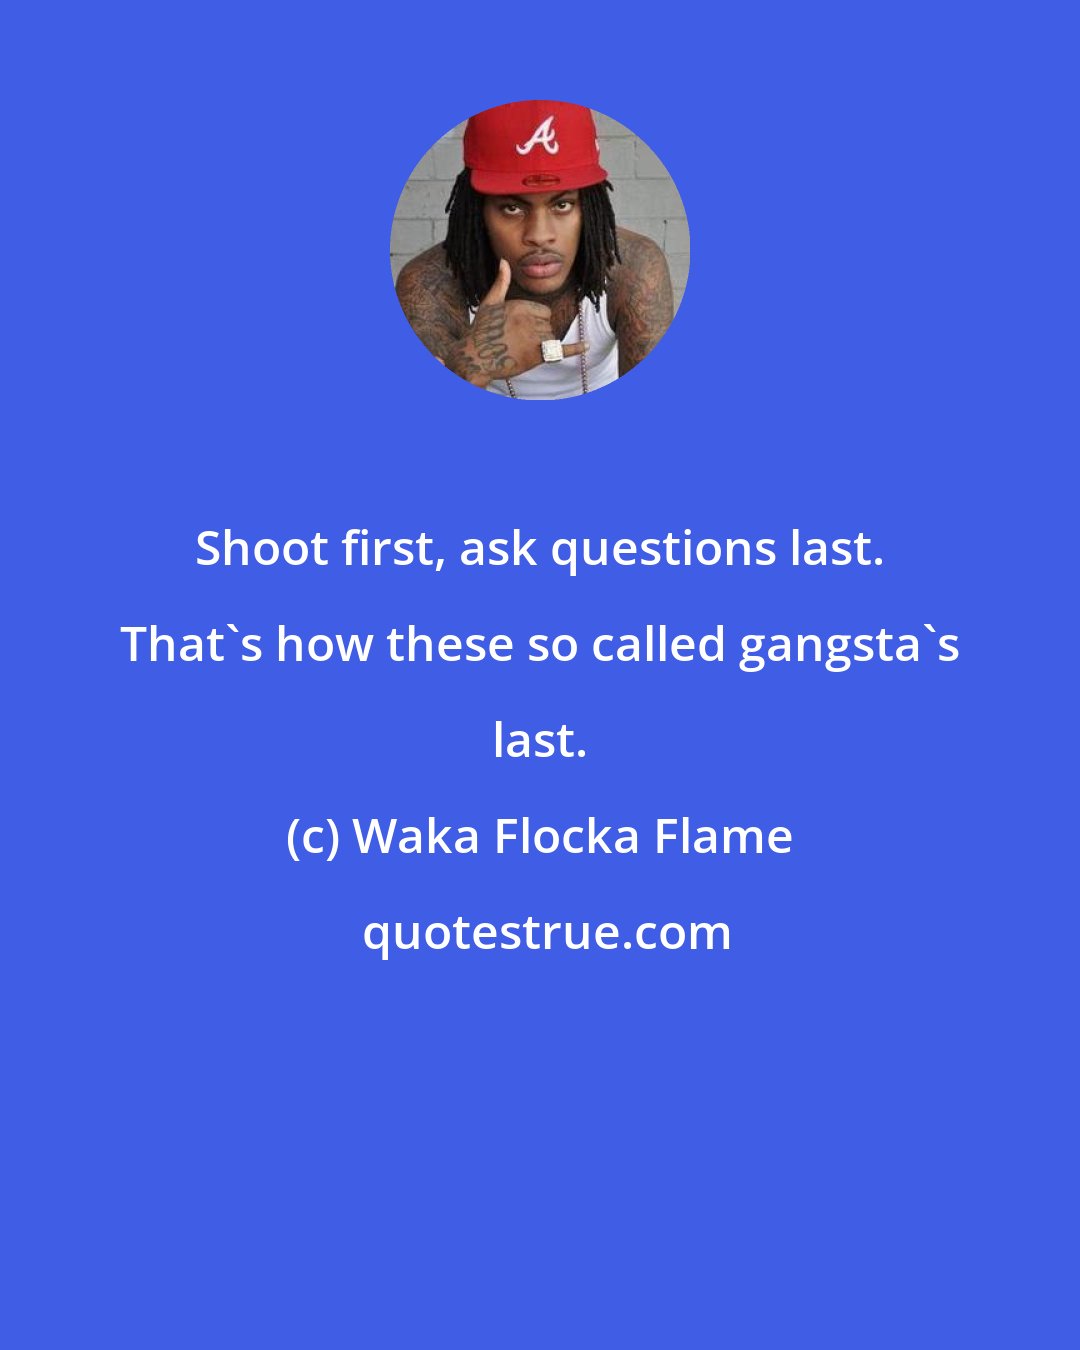 Waka Flocka Flame: Shoot first, ask questions last. That's how these so called gangsta's last.